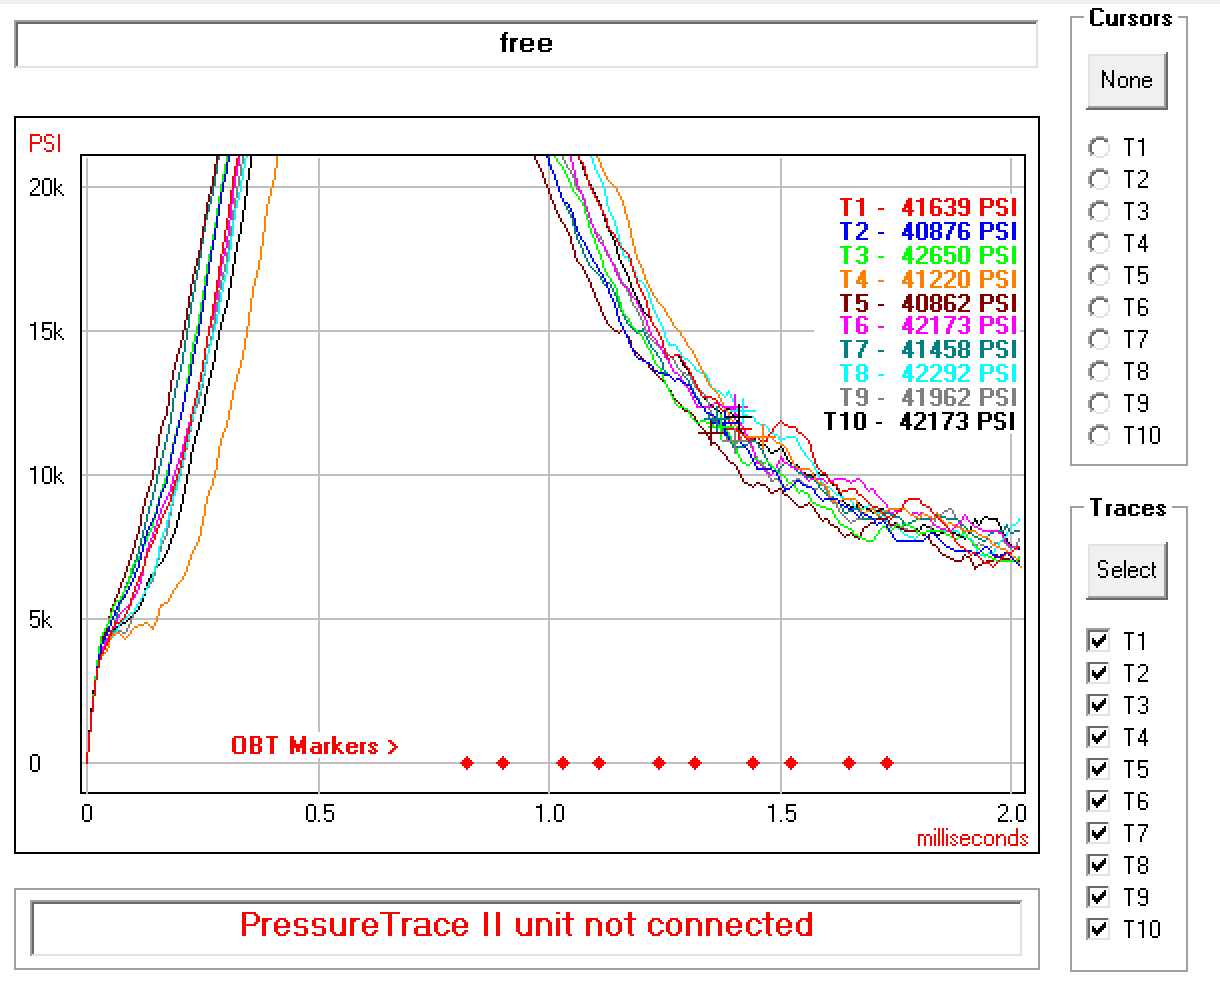 Pressure Trace II screenshot for the Free-Recoil string. Barrel exit time marked with ＋.